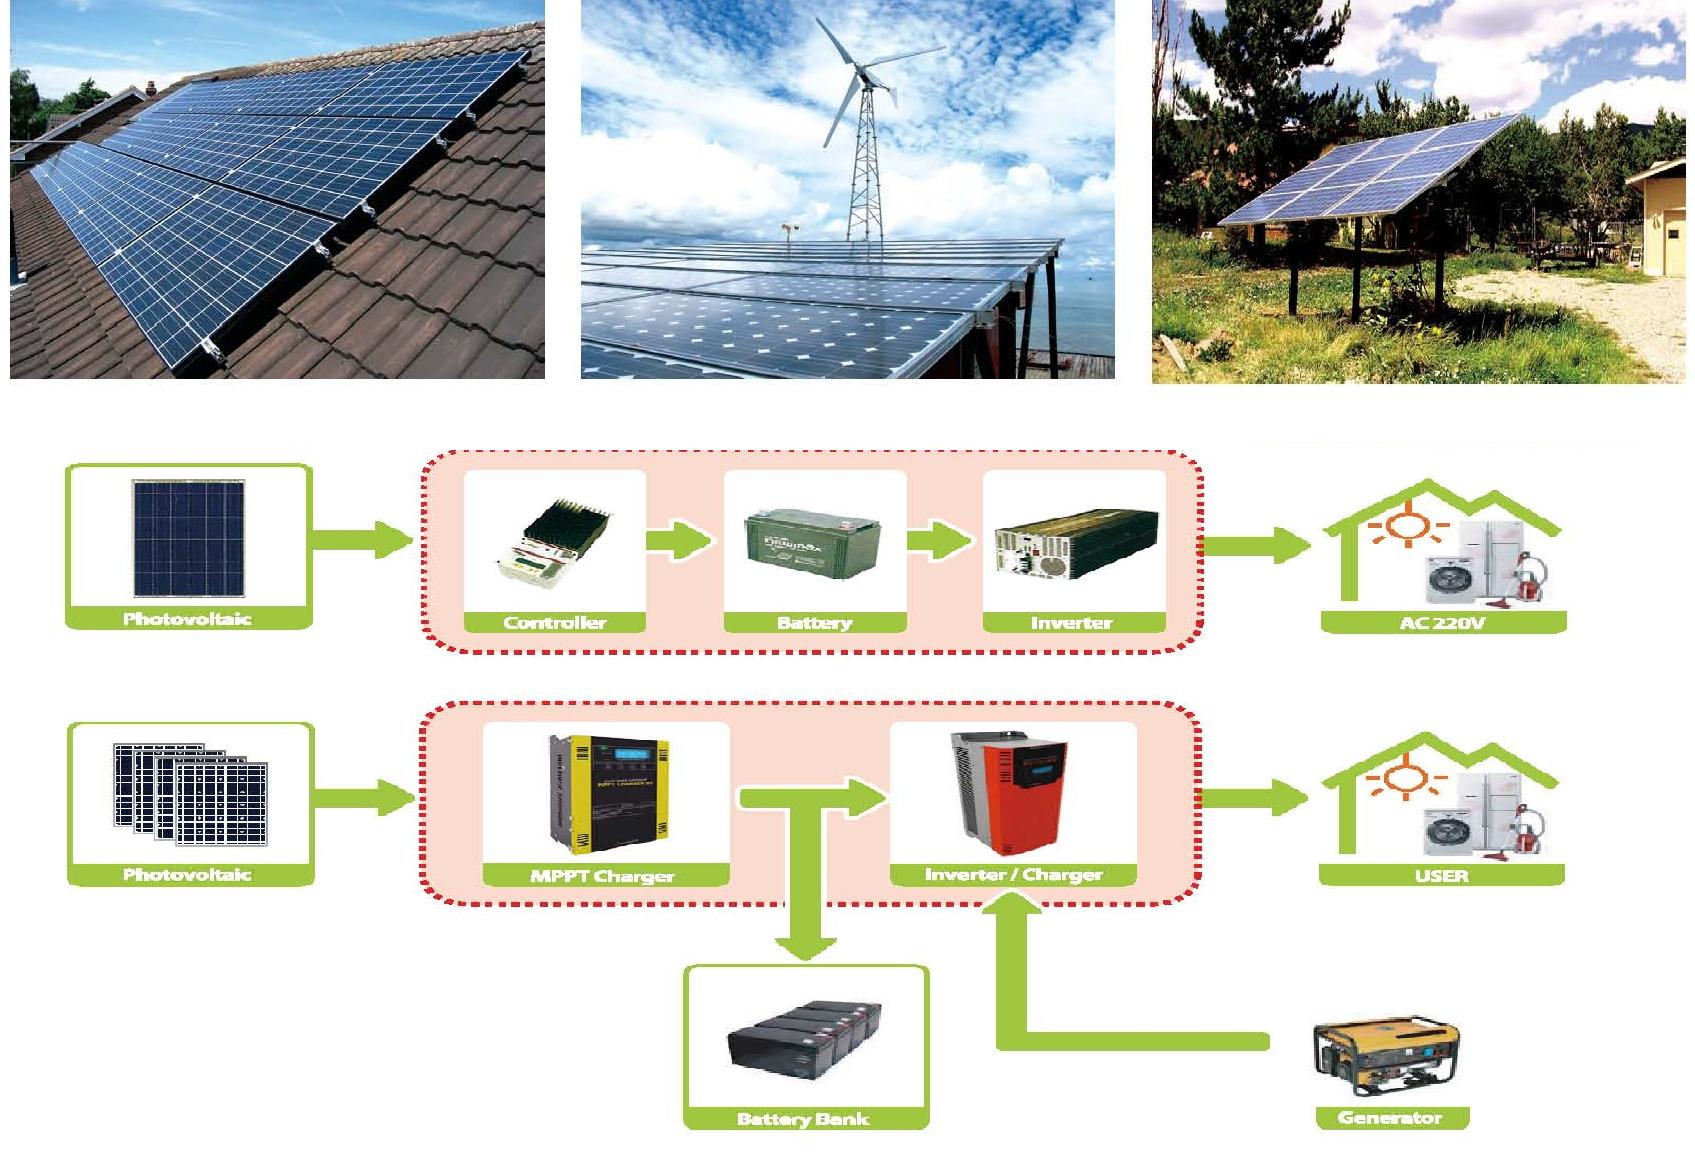 Standalone photovoltaic system